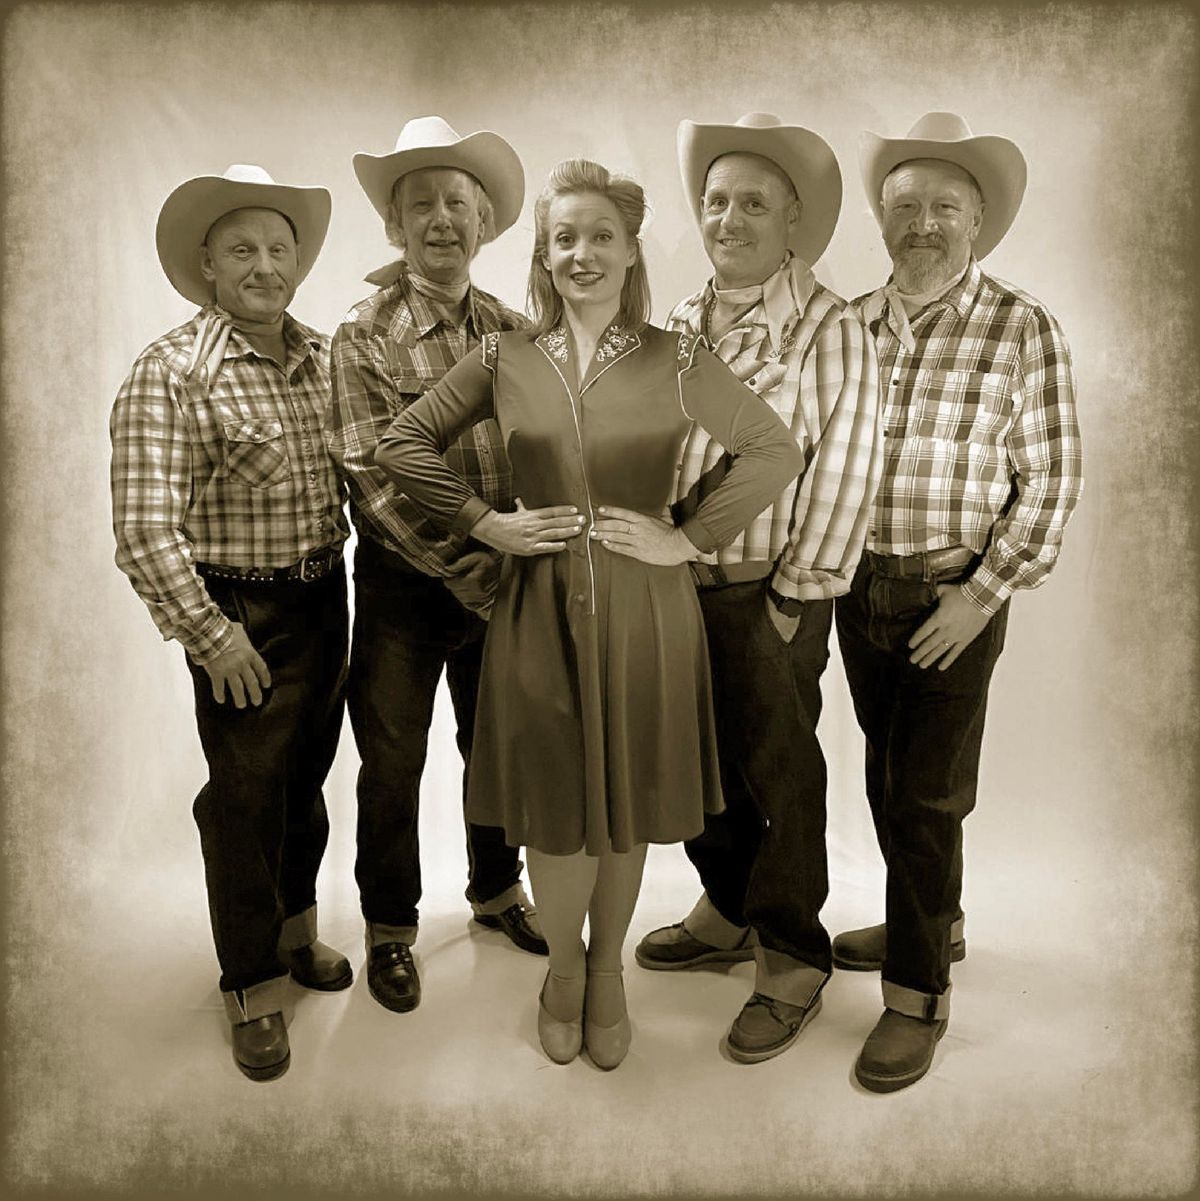 Swingin' Western grooves with Ellie B & the Tonopah Trailblazers! Free adm., donations requested